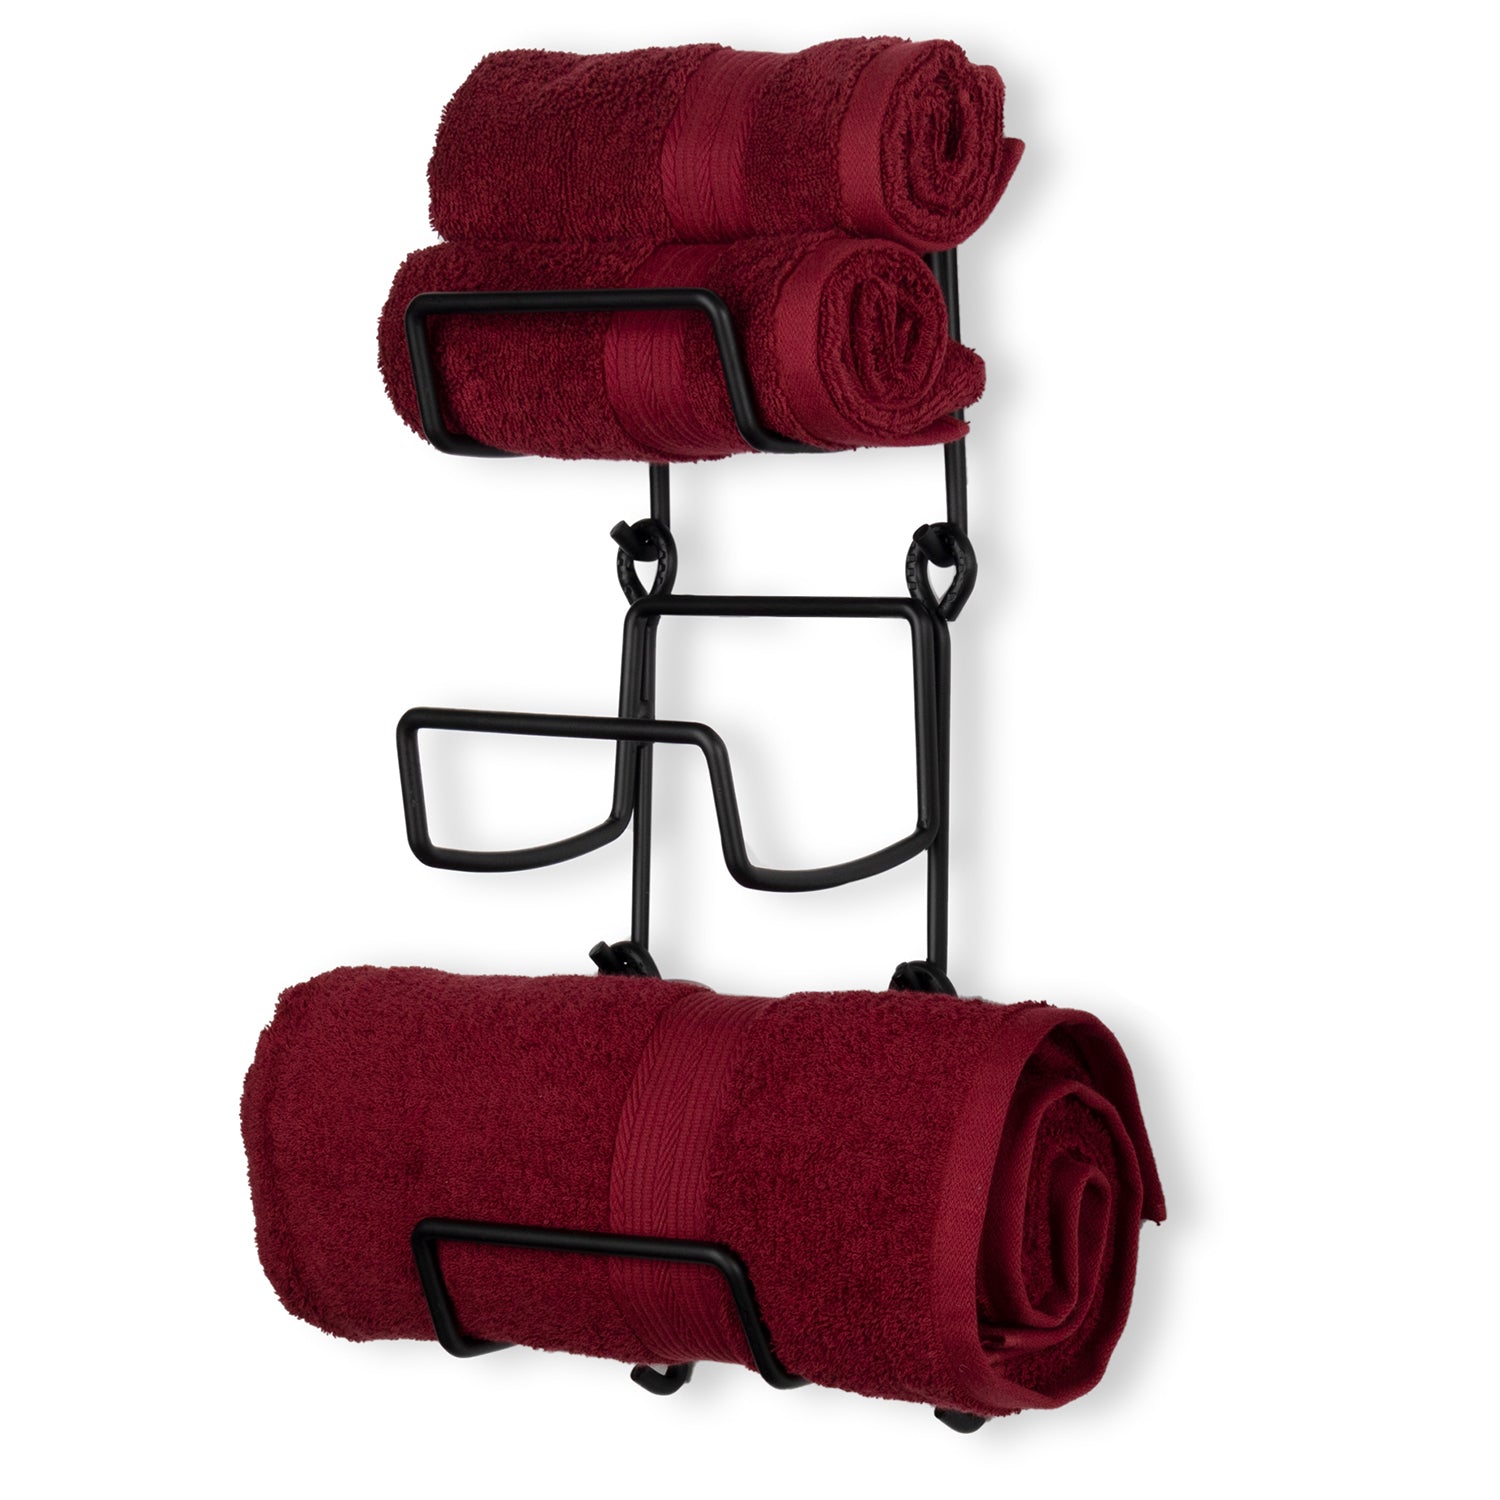 BOTO Towel Rack Wall Mounted 5-Sectional Bathroom Organizer with